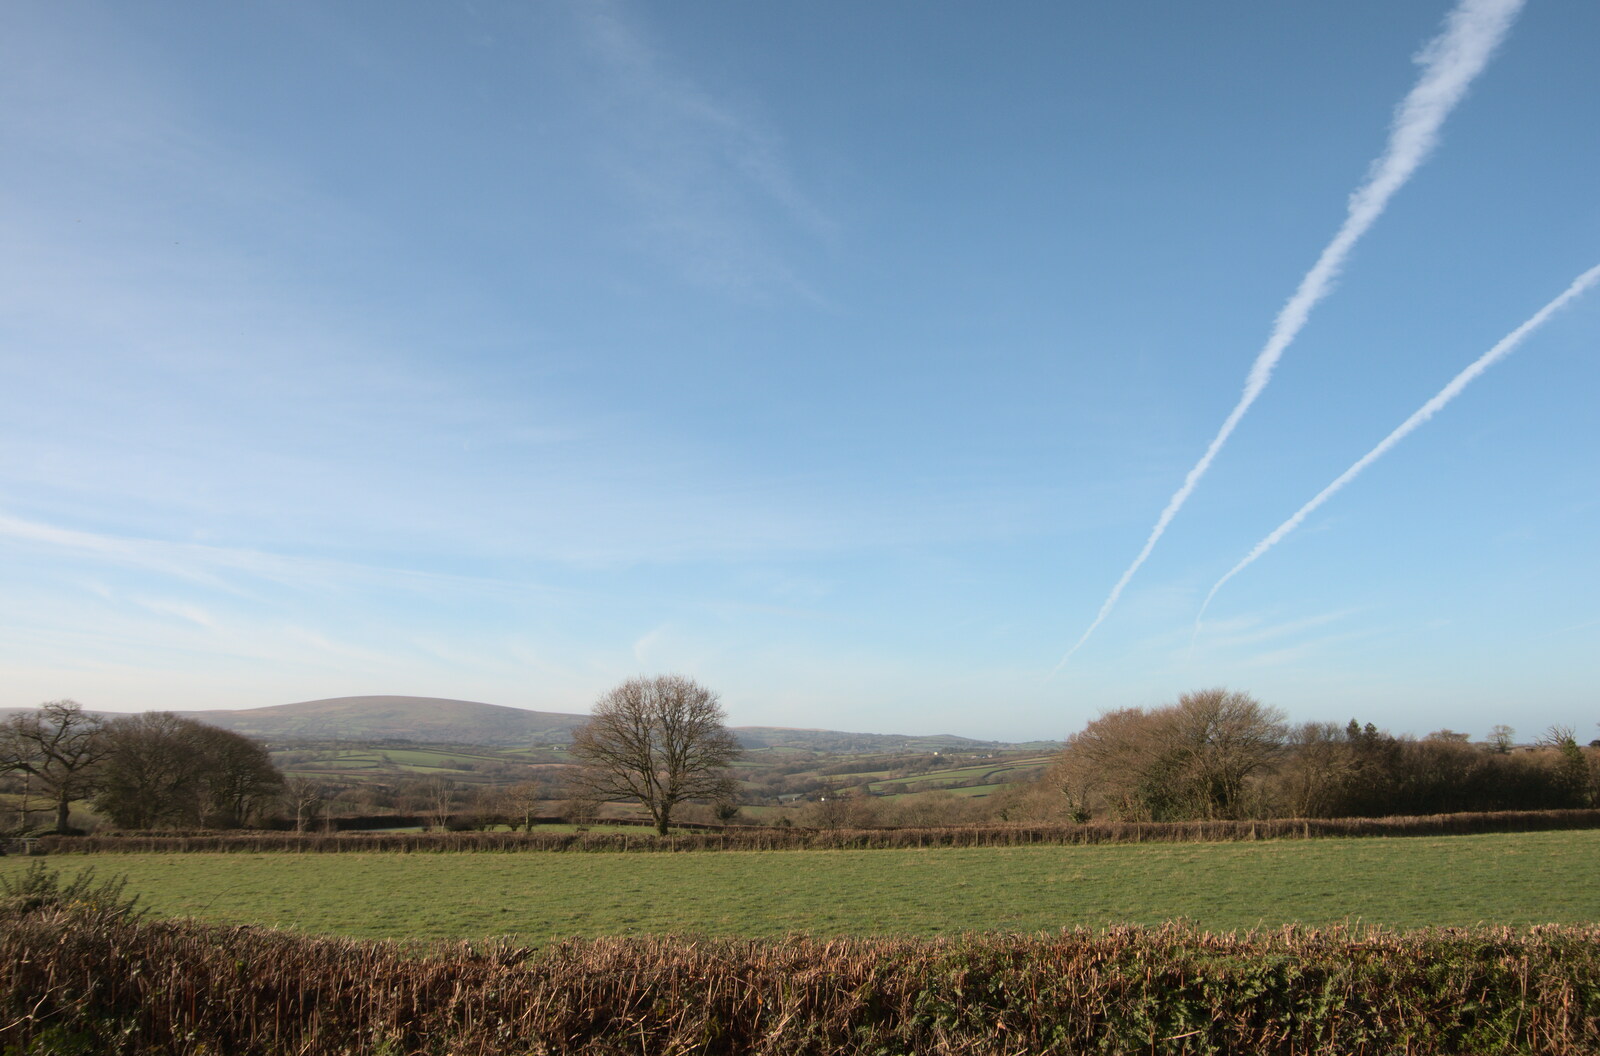 A view towards Dartmoor from A Short Trip to Spreyton, Devon - 18th January 2020